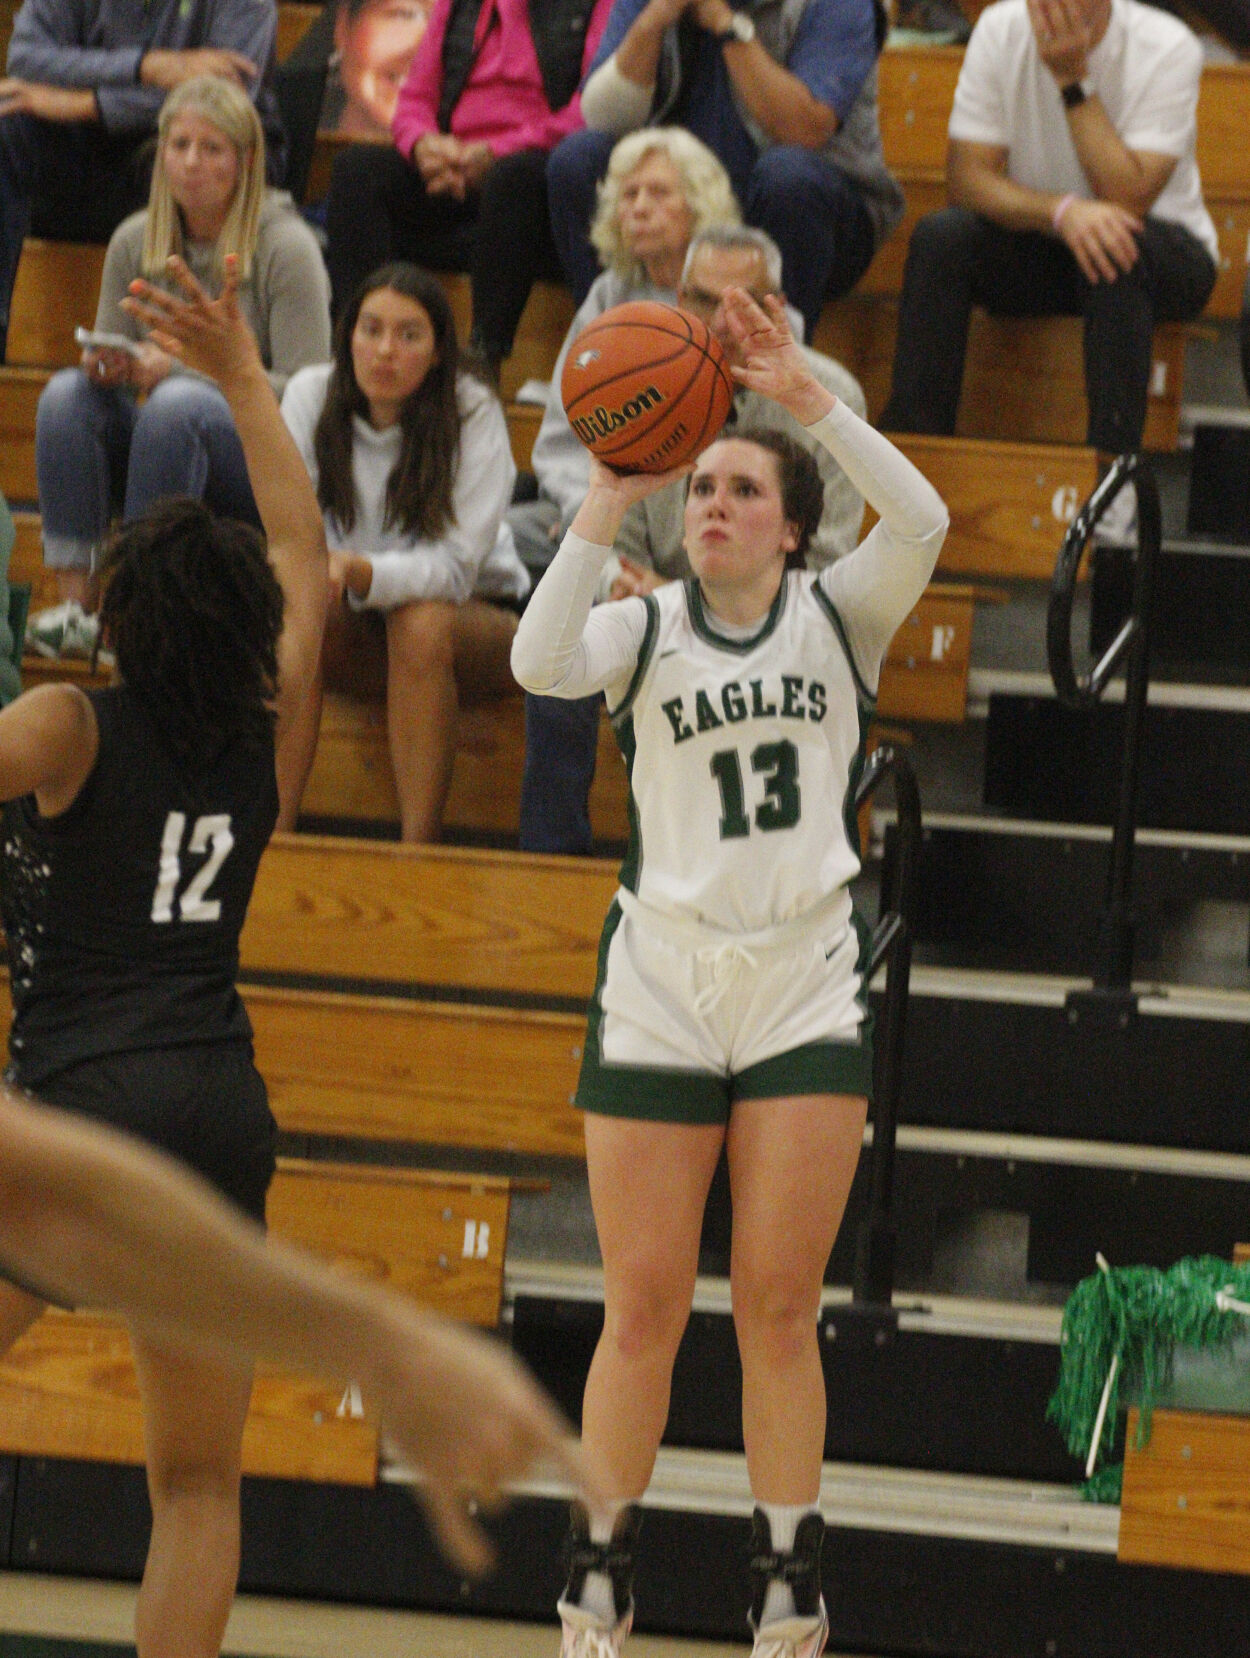 Zionsville Lady Eagles Claim Thrilling Overtime Victory with Emma Haan’s Game-Winning 3-Pointer